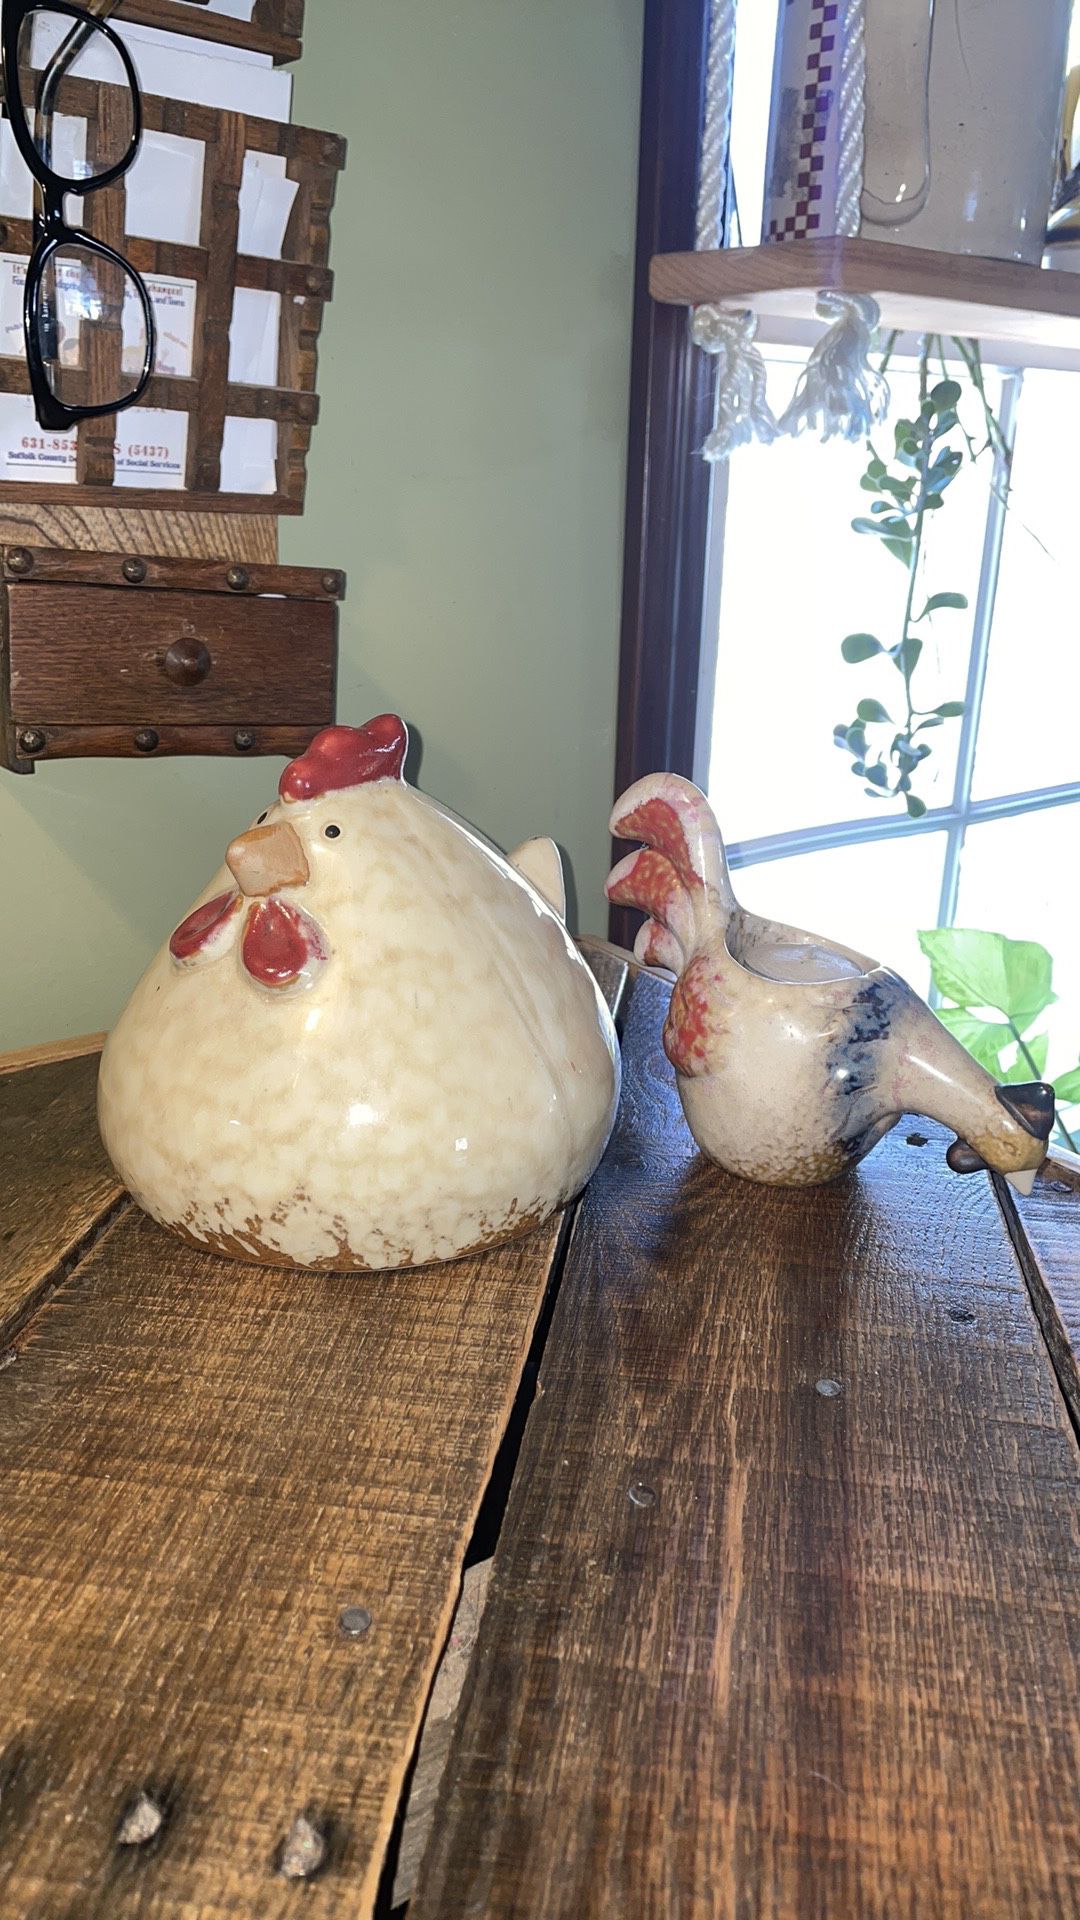 Farmhouse Rustic Ceramic Chicken and Rooster candle holder decor